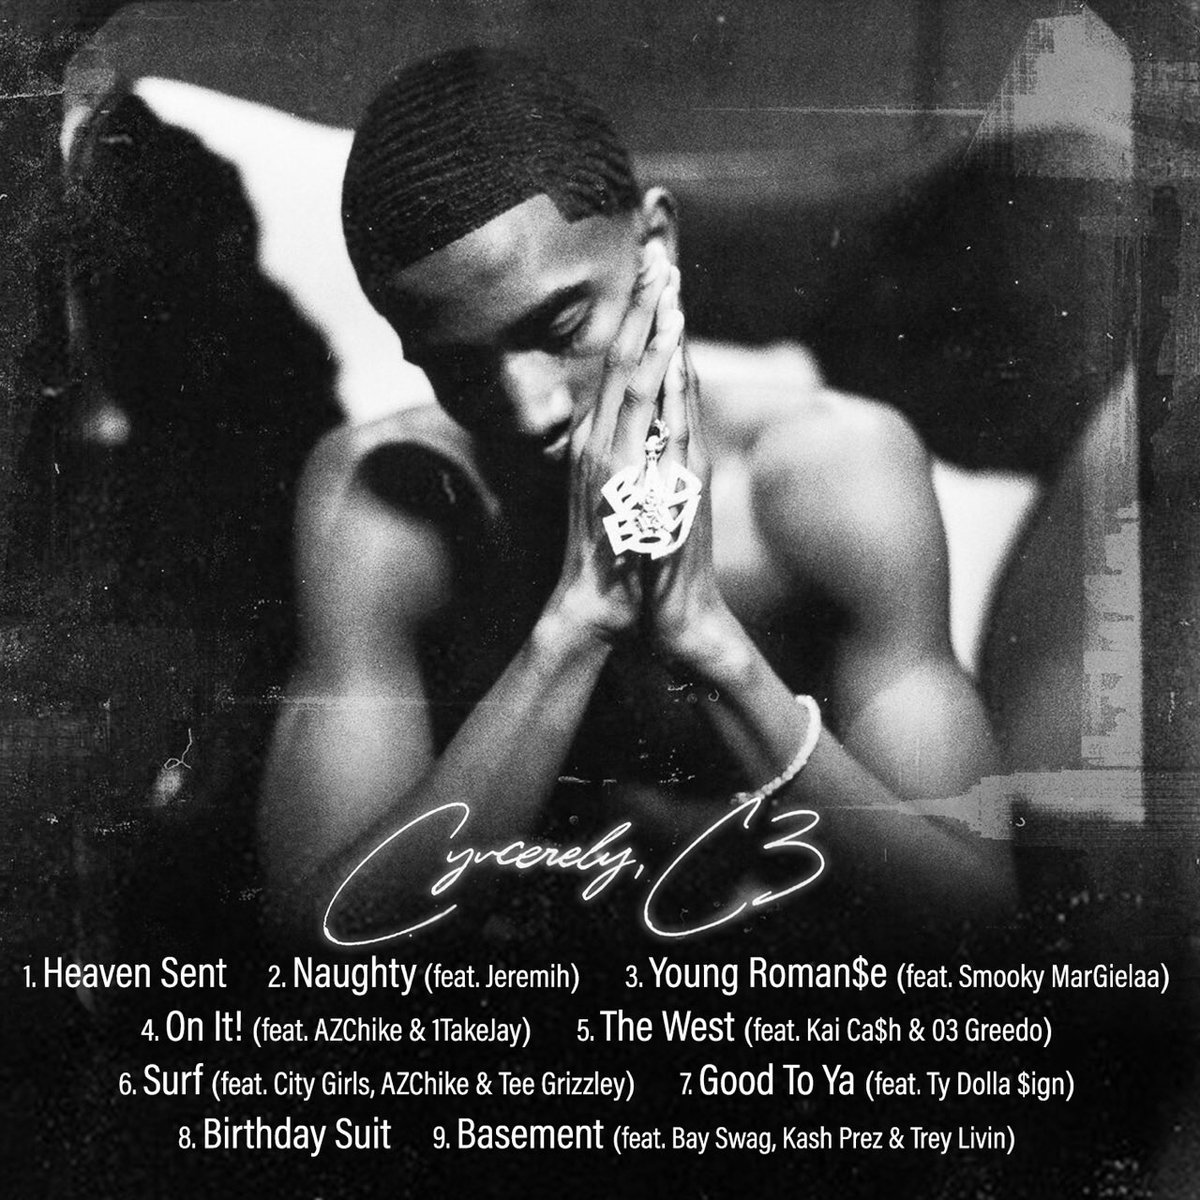 RT @Kingcombs: #CyncerelyC3 3/29. https://t.co/YeTh4DERQK https://t.co/kDsfMujTq3